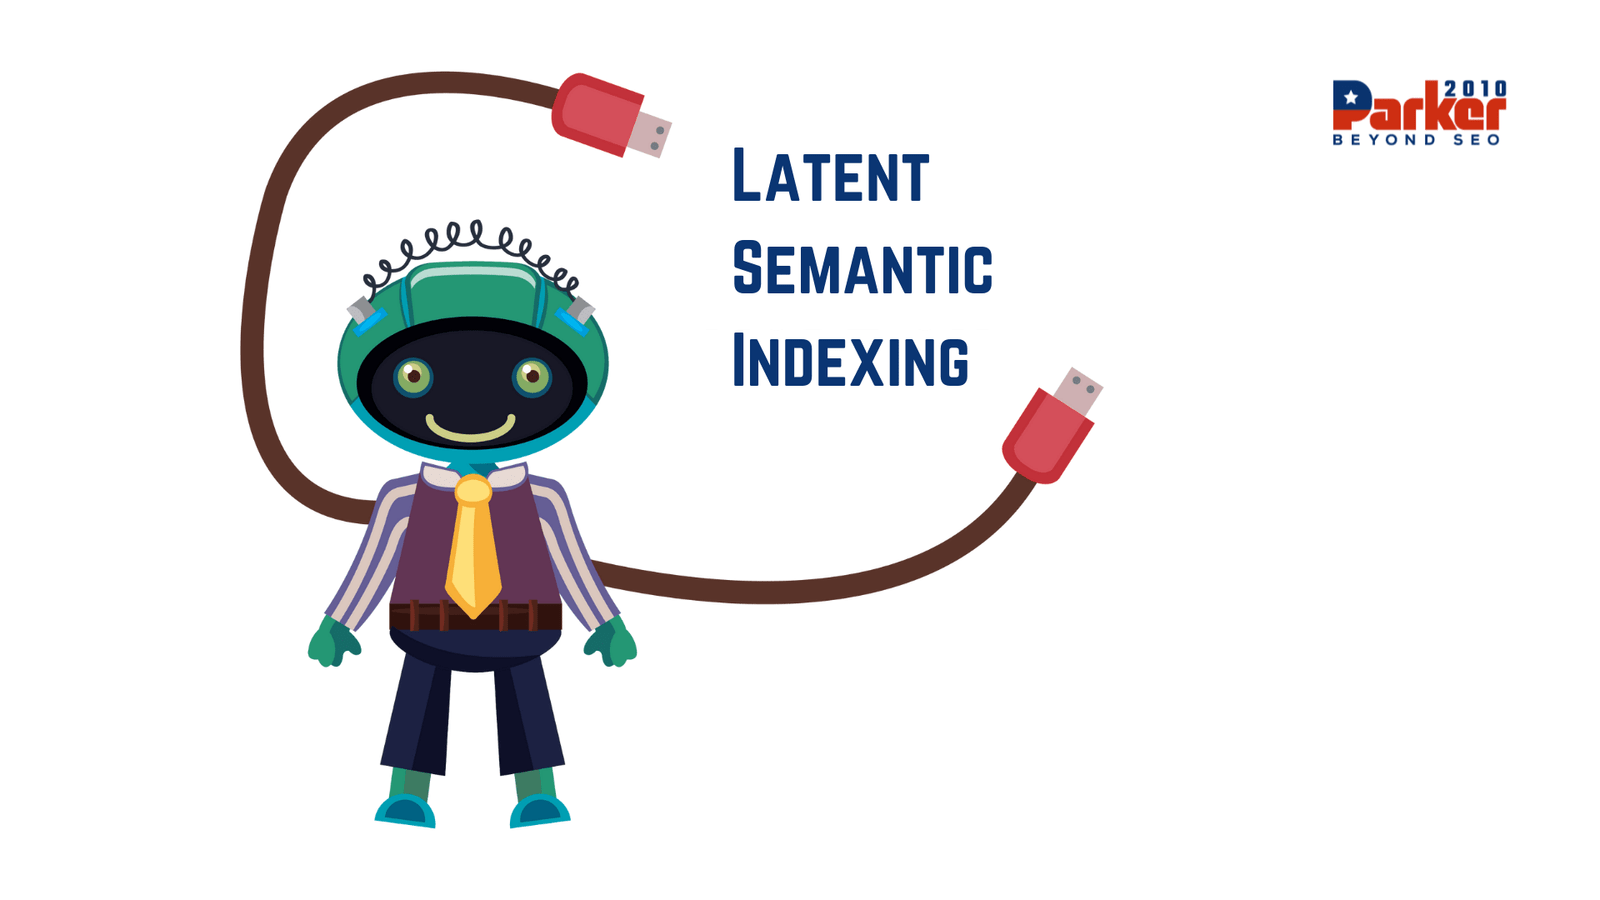 Latent Semantic Indexing_Parker2010